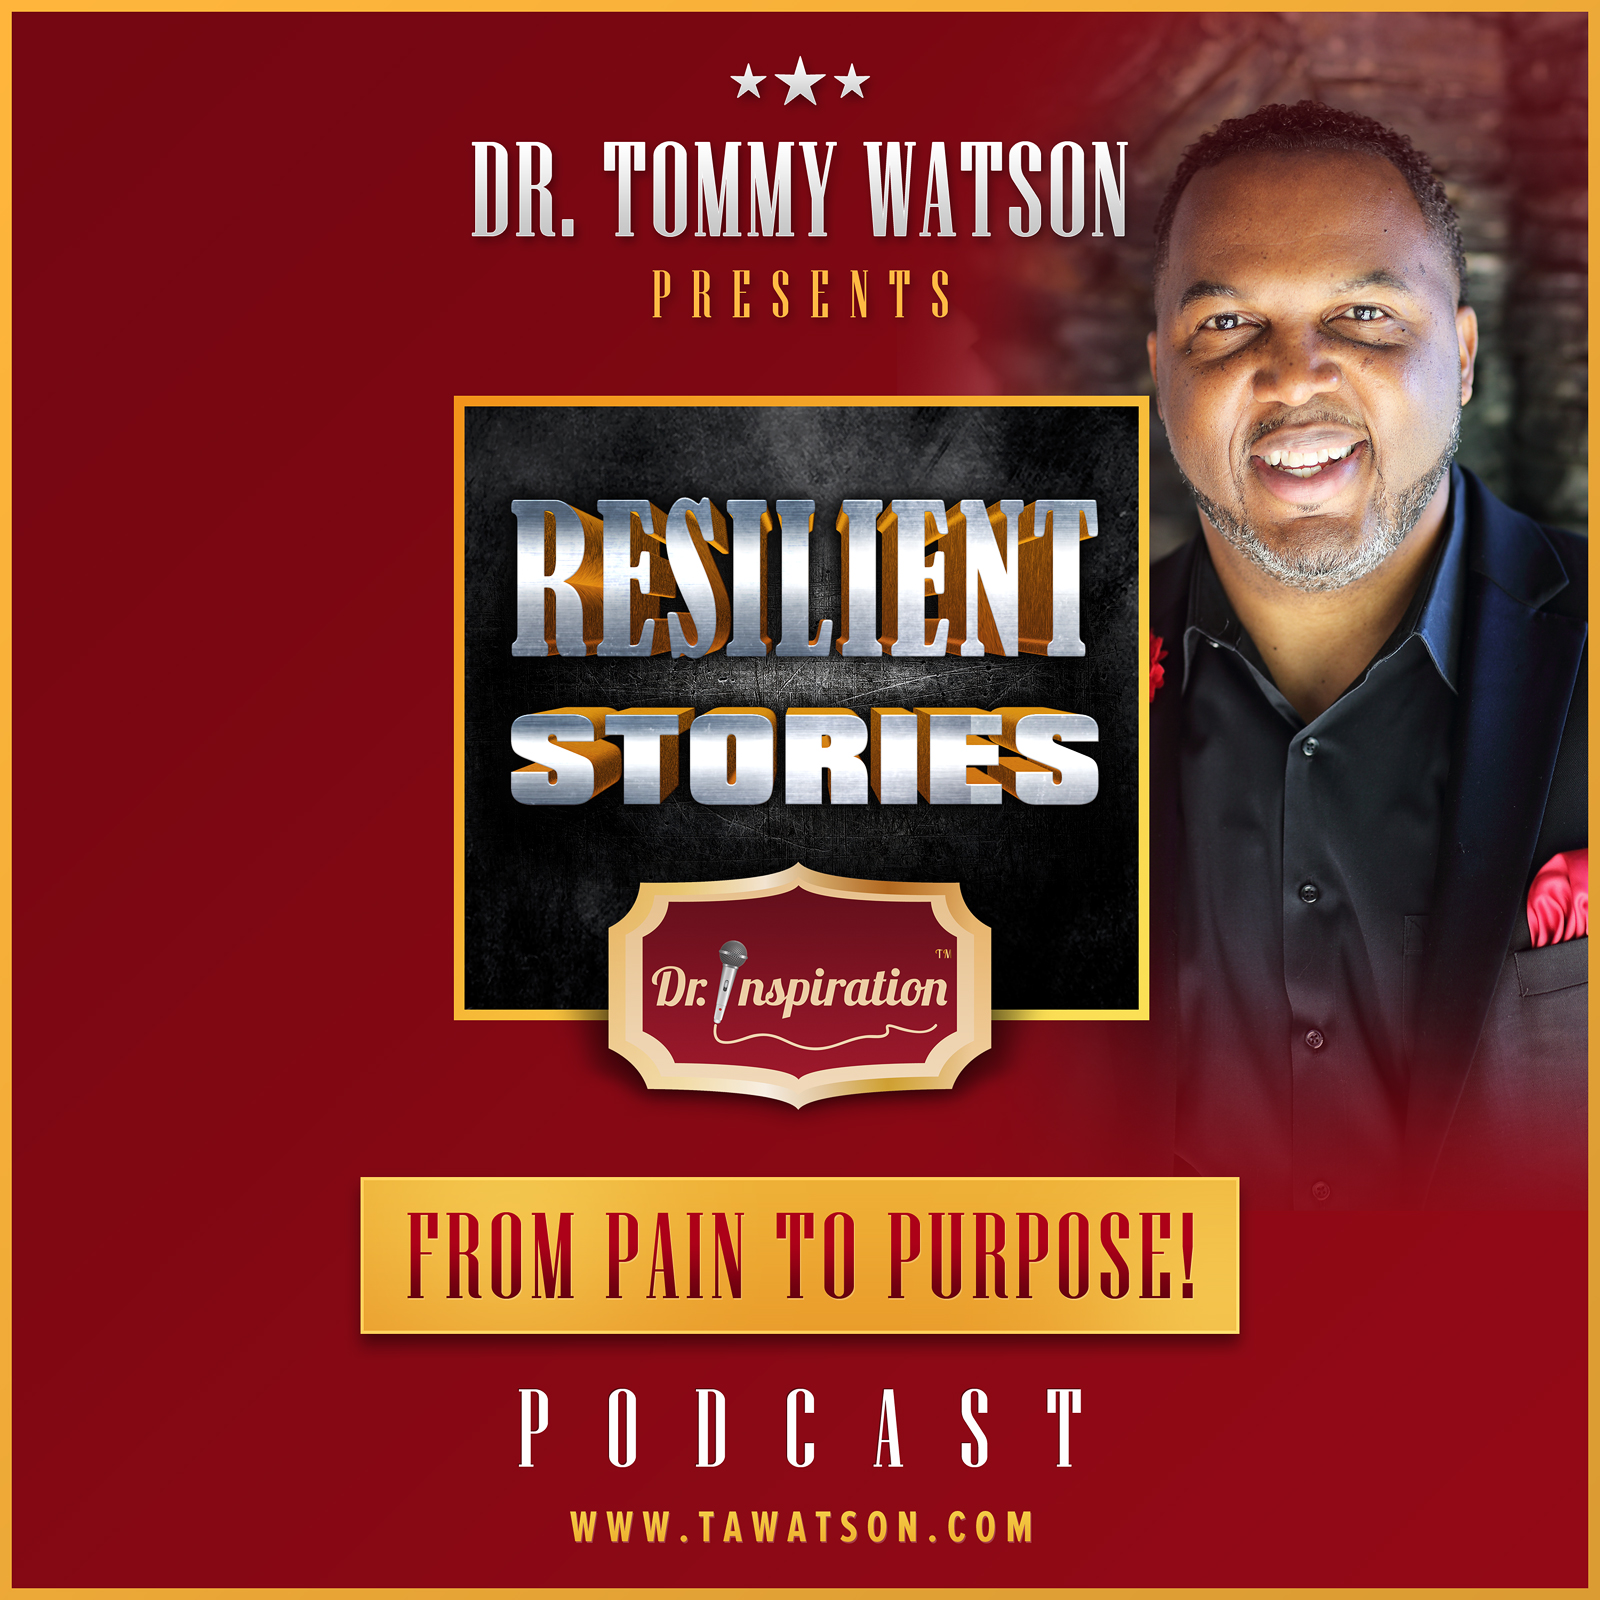 Dr. Watson Interview for Resilient Stories